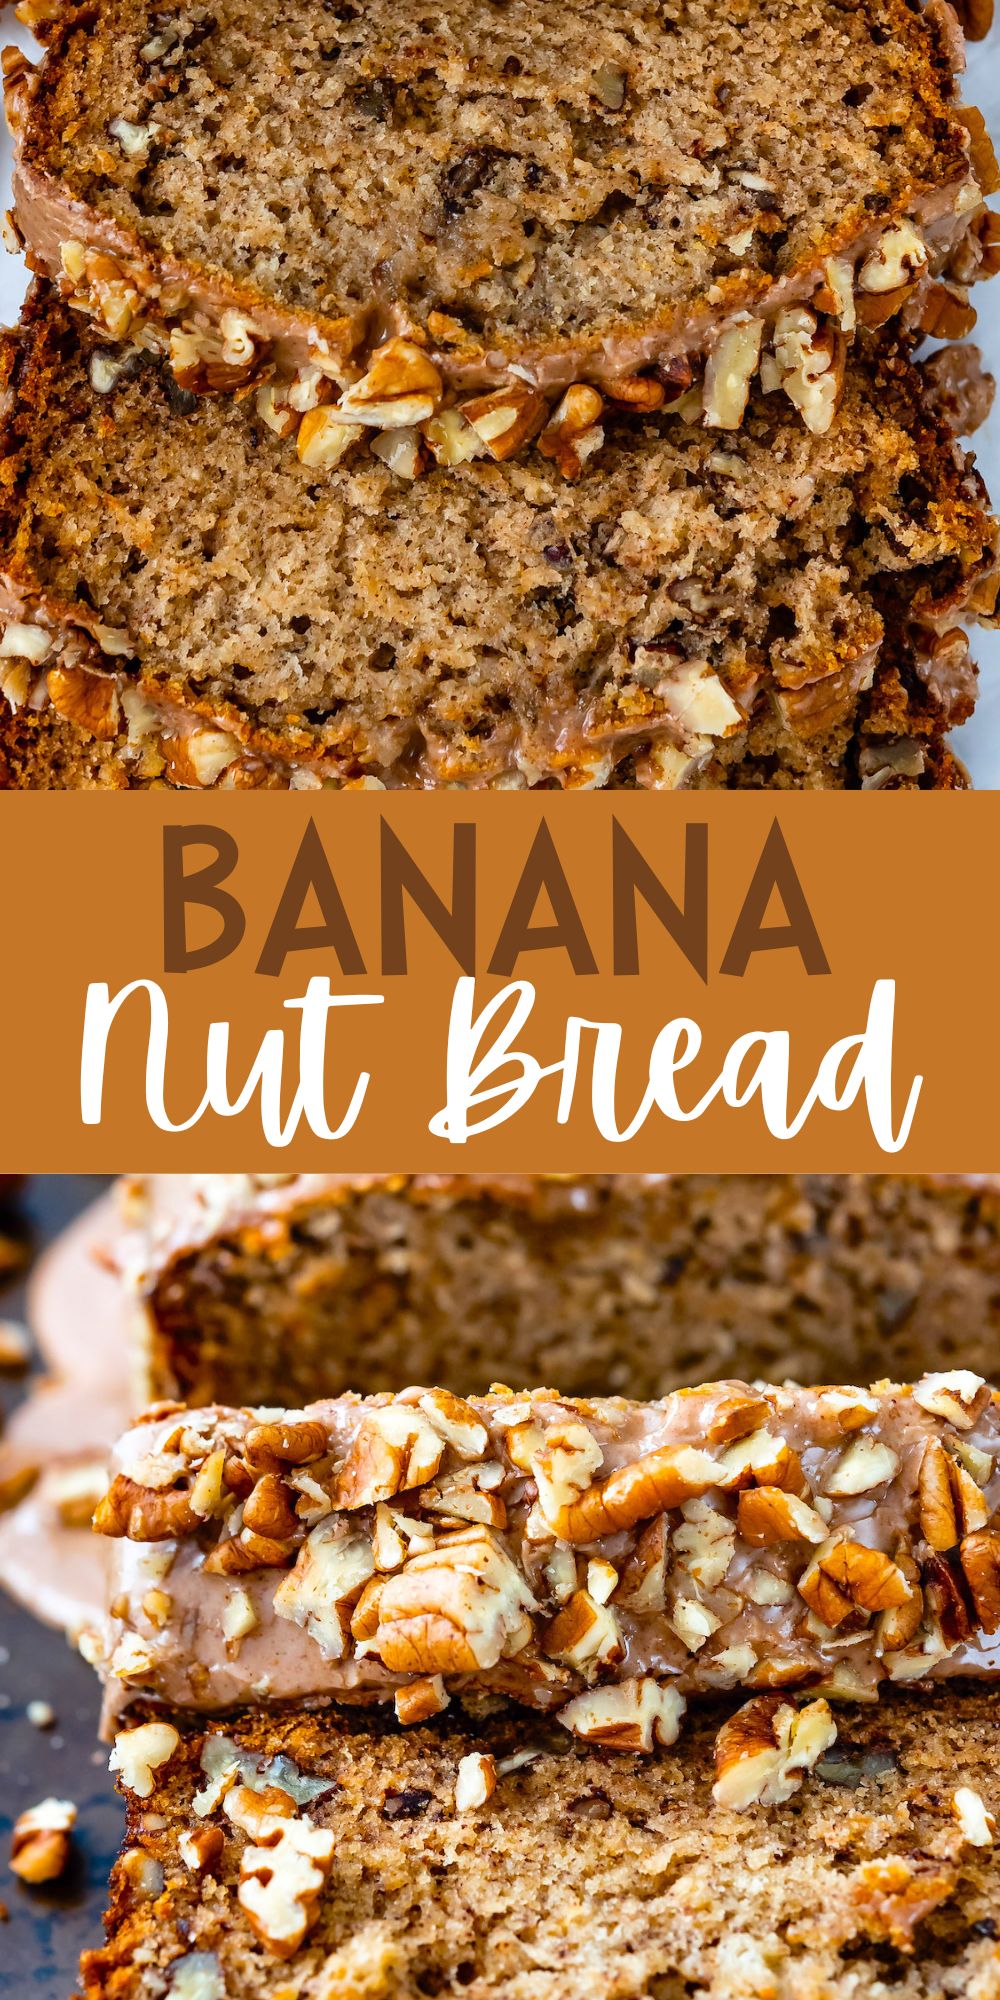 two photos of sliced banana bread topped with frosting and pecans with words on the image.